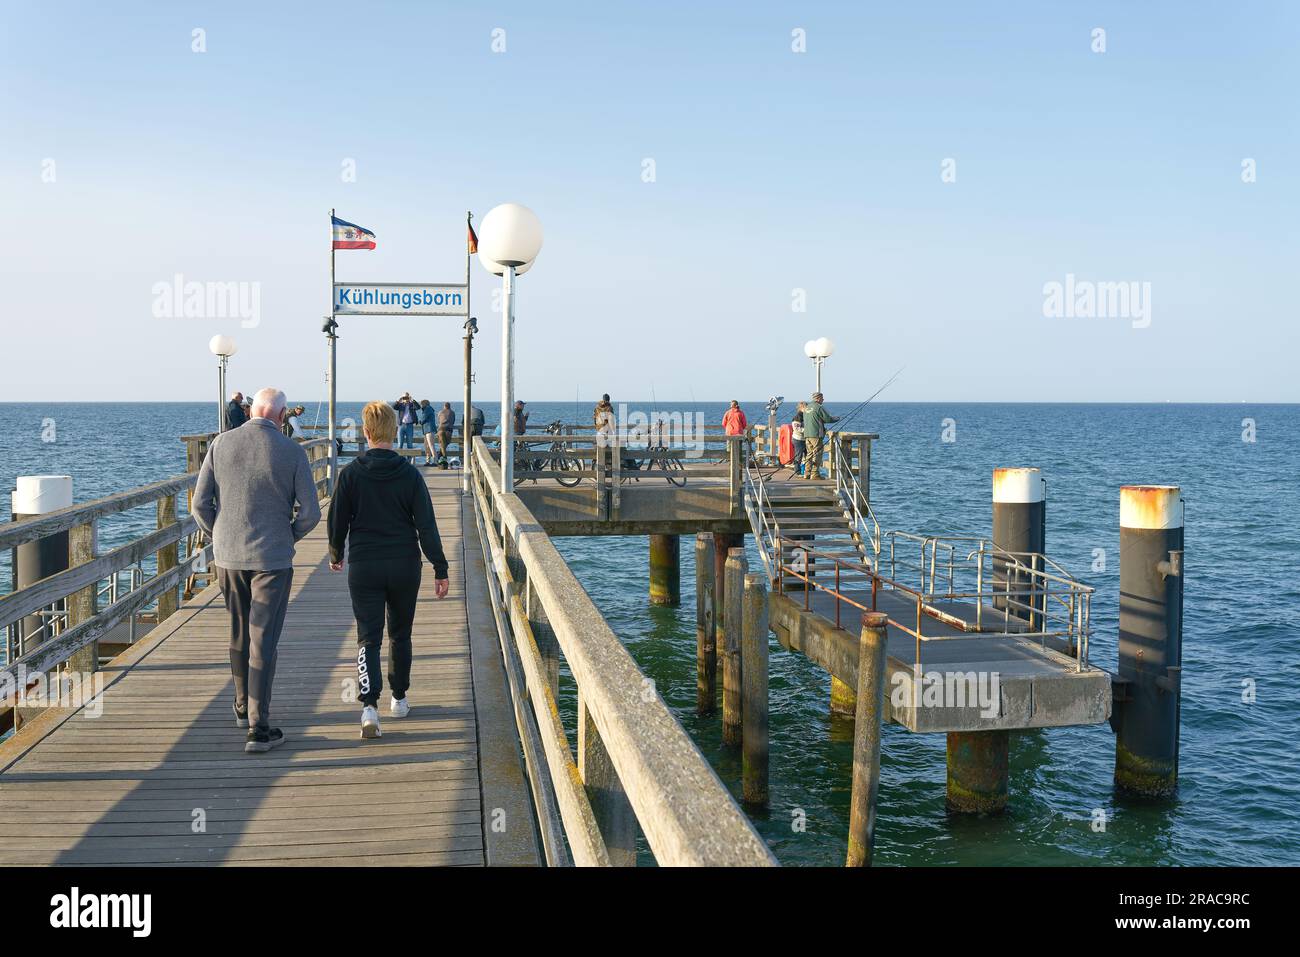 Holidaymakers and fishermen on the pier of Kühlungsborn on the German Baltic Sea coast Stock Photo